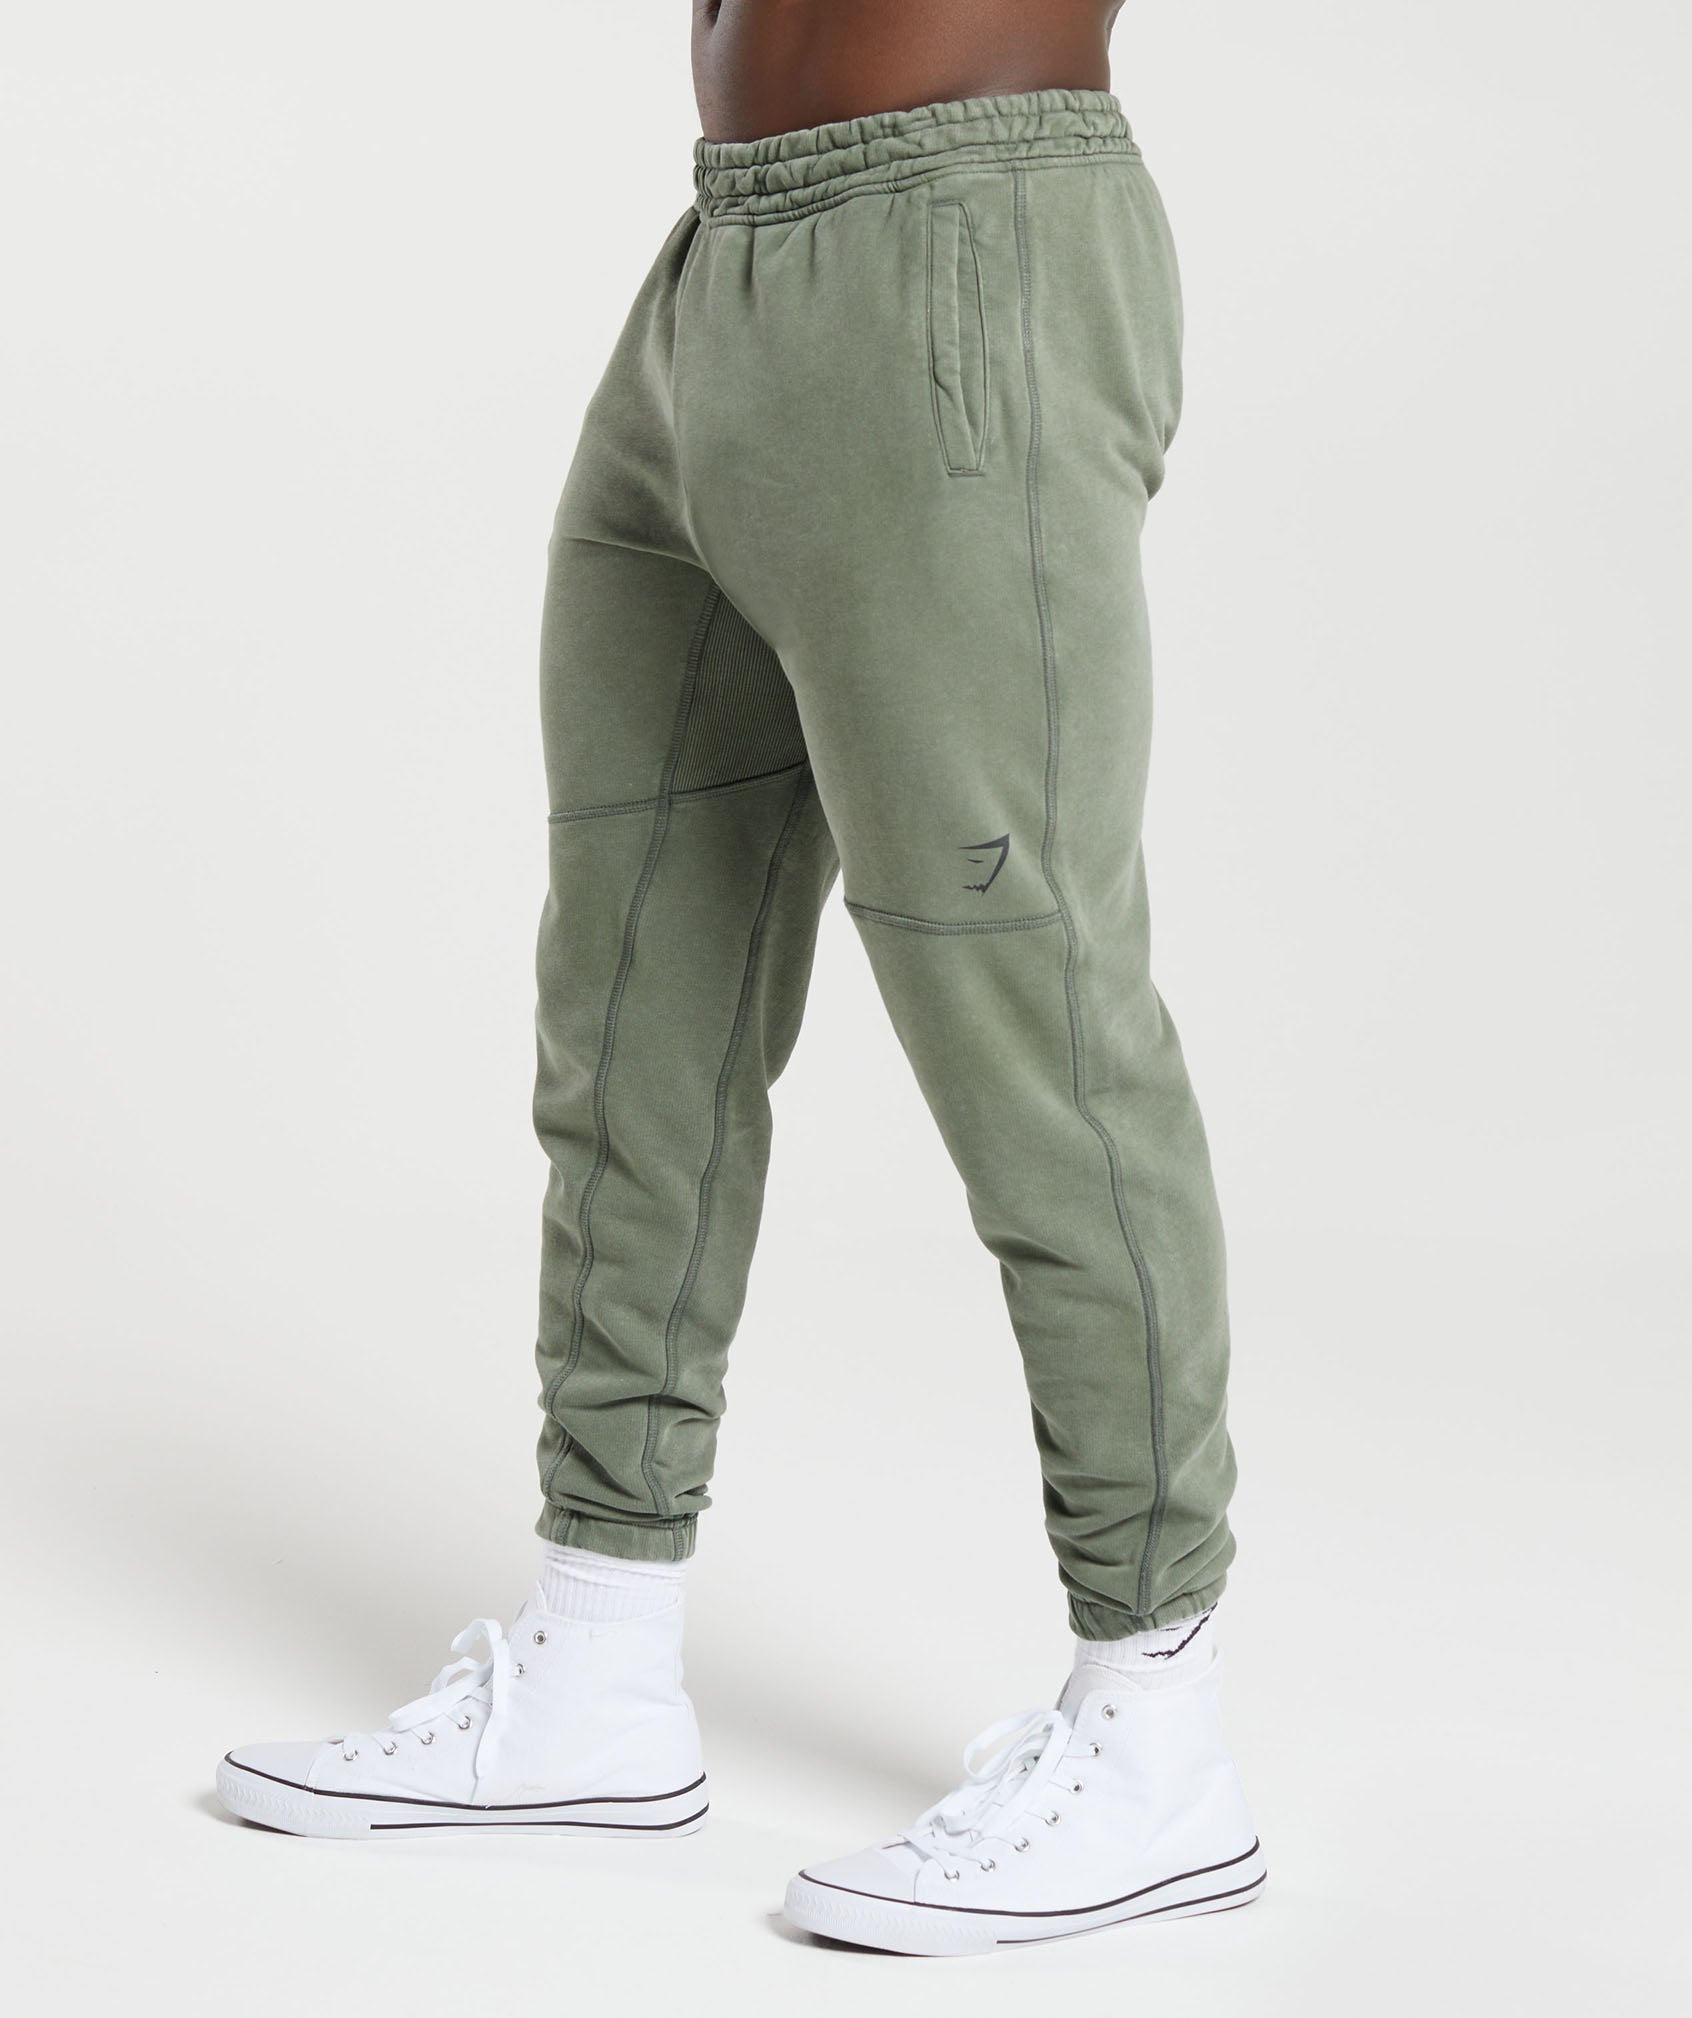 Heritage Joggers in Dusk Green - view 3